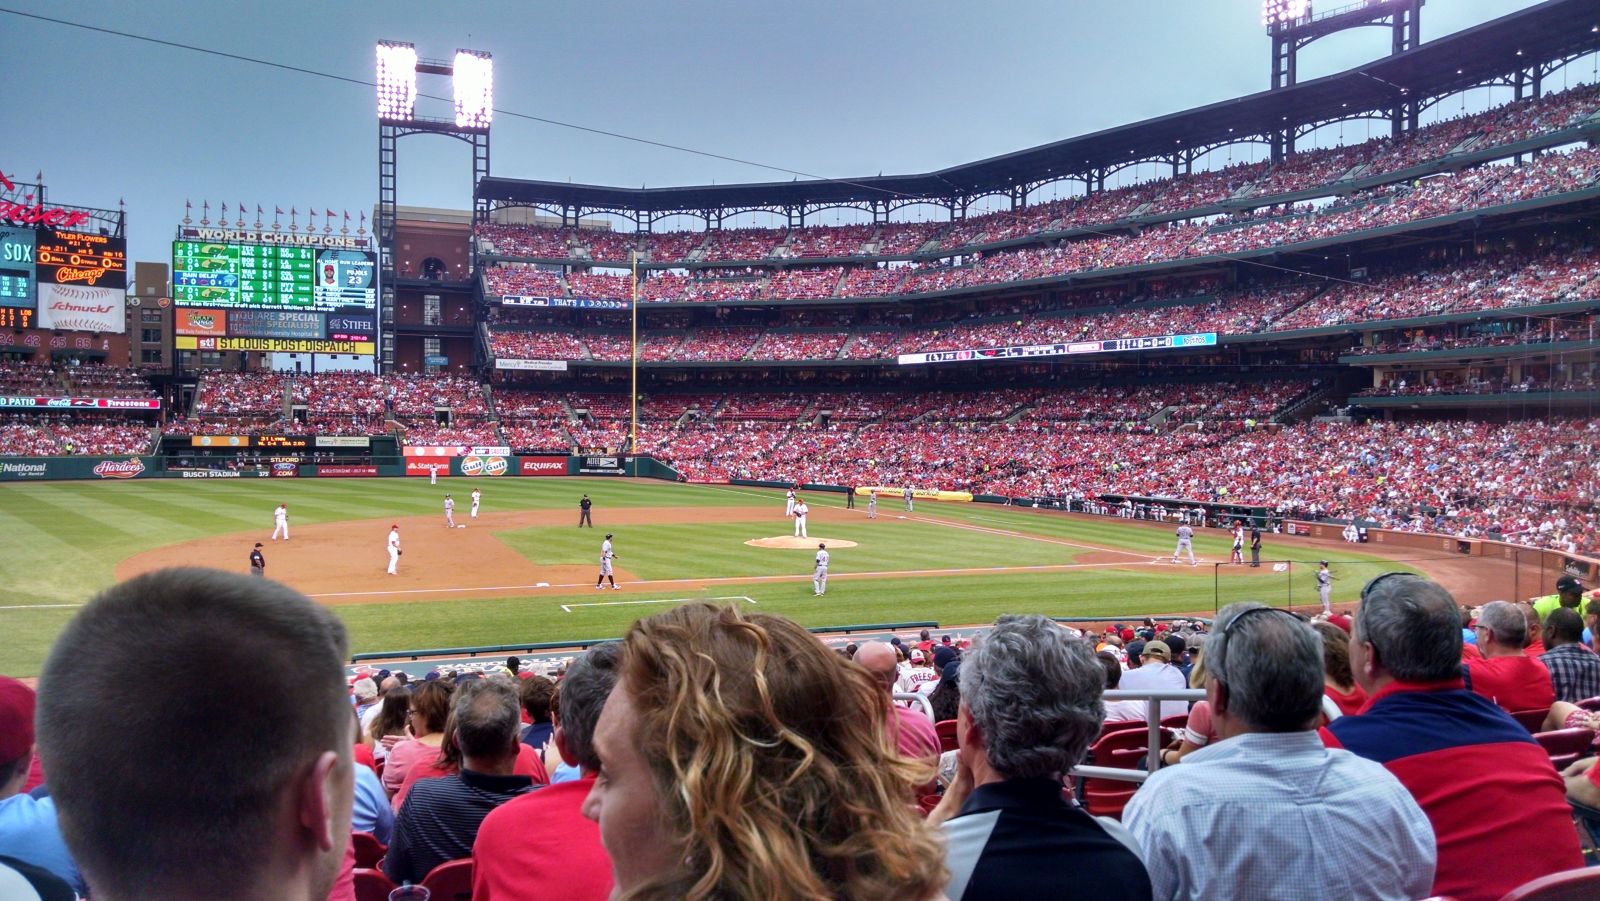 section 158, row 18 seat view  - busch stadium